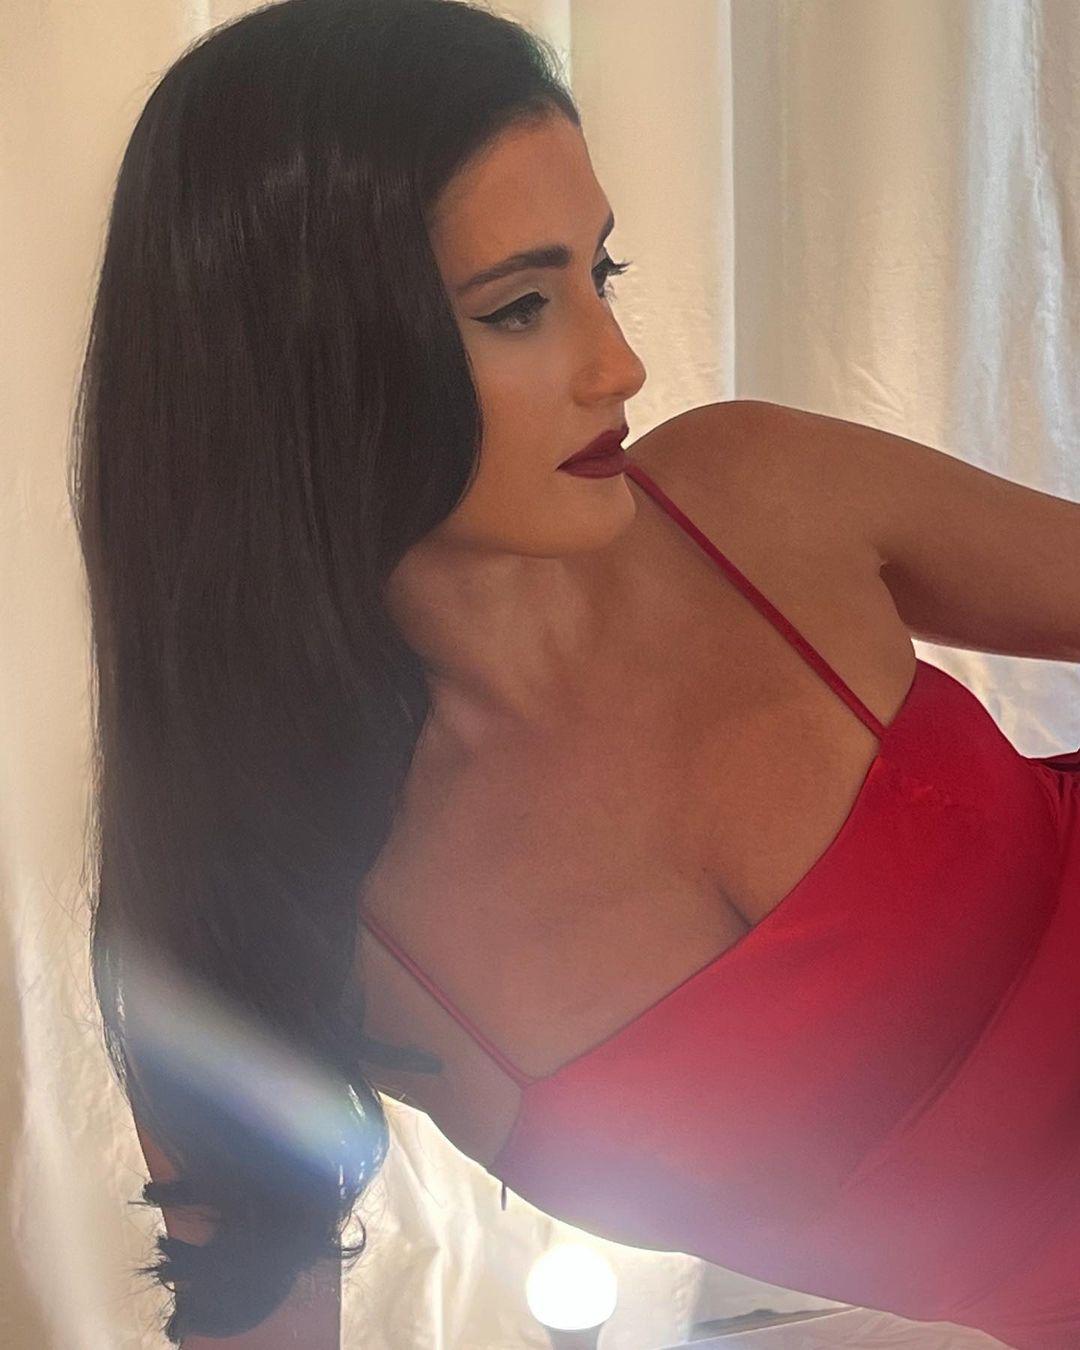 Ariel Frenkel Proves She Is The 'Sexiest Queen' In Steamy IG Post